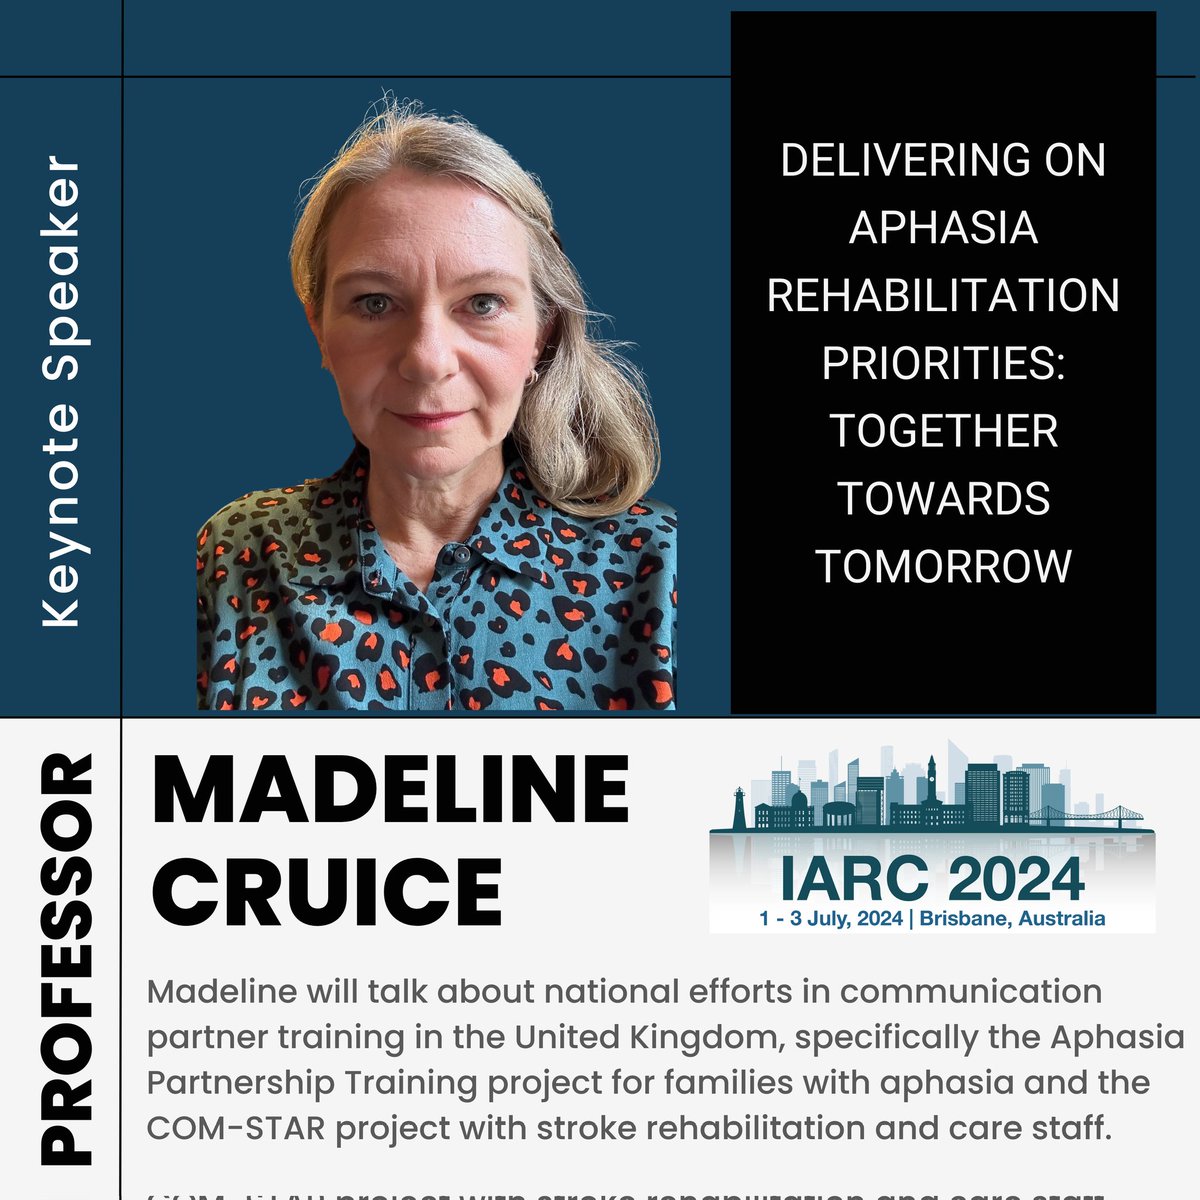 Our first Keynote speaker for @IARC2024 is @MadelineCruice Professor of #Aphasia Rehabilitation & Recovery @CityUniLondon. She represents @RCSLT on the UK Stroke Forum Organising & Scientific Committees & is the Joint Chair of @CATs_Aphasia (not to mention an @UQHealth alumnus!)